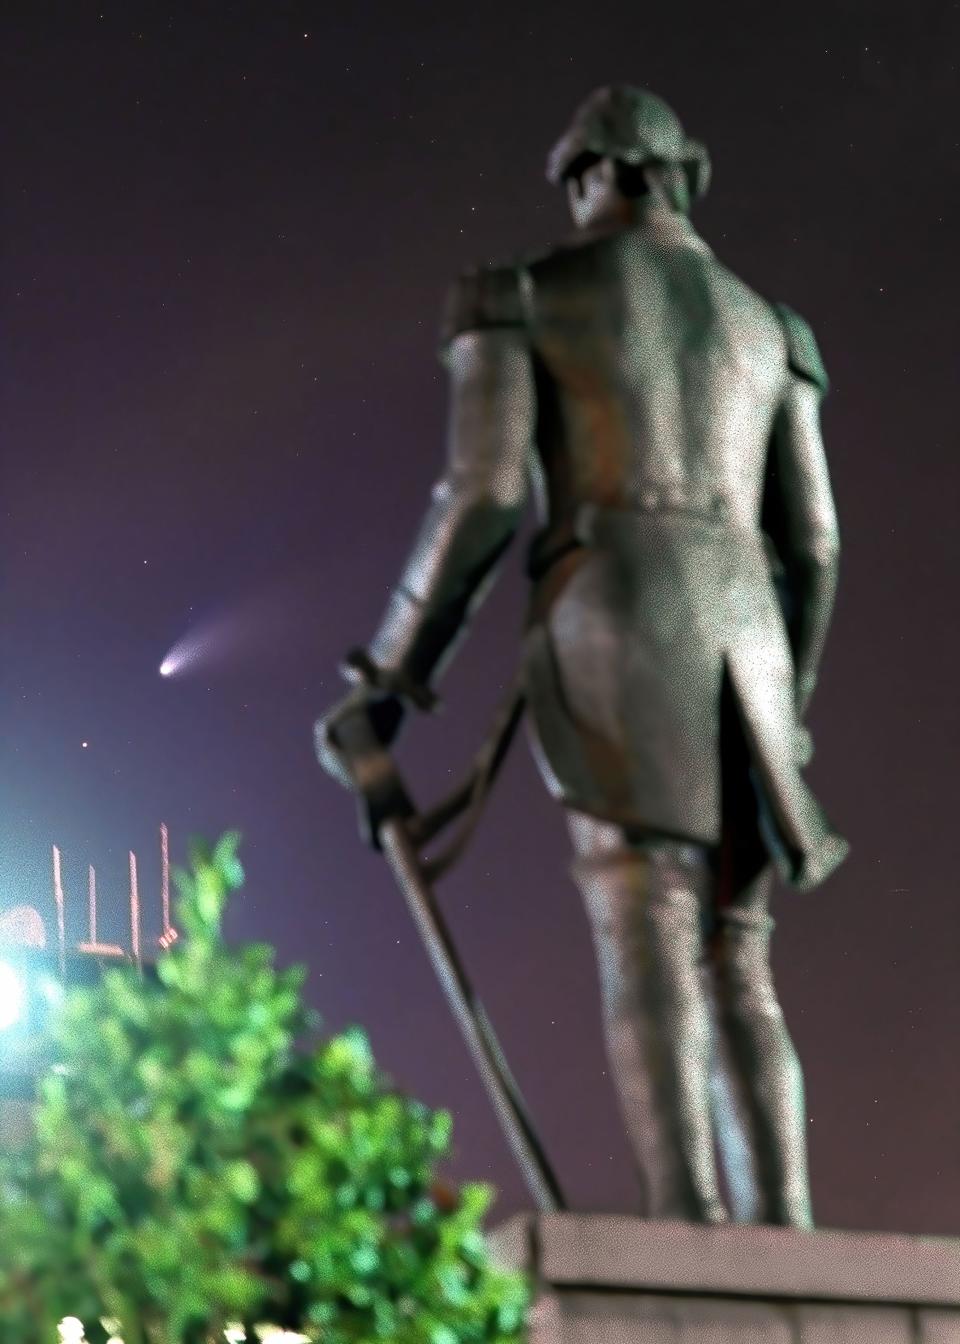 Bright enough for city dwellers,  Comet Hale-Bopp is obvious as it hangs in a brightly lighted downtown Fayetteville sky over the statue of Marquis de Lafayette in March 1997.